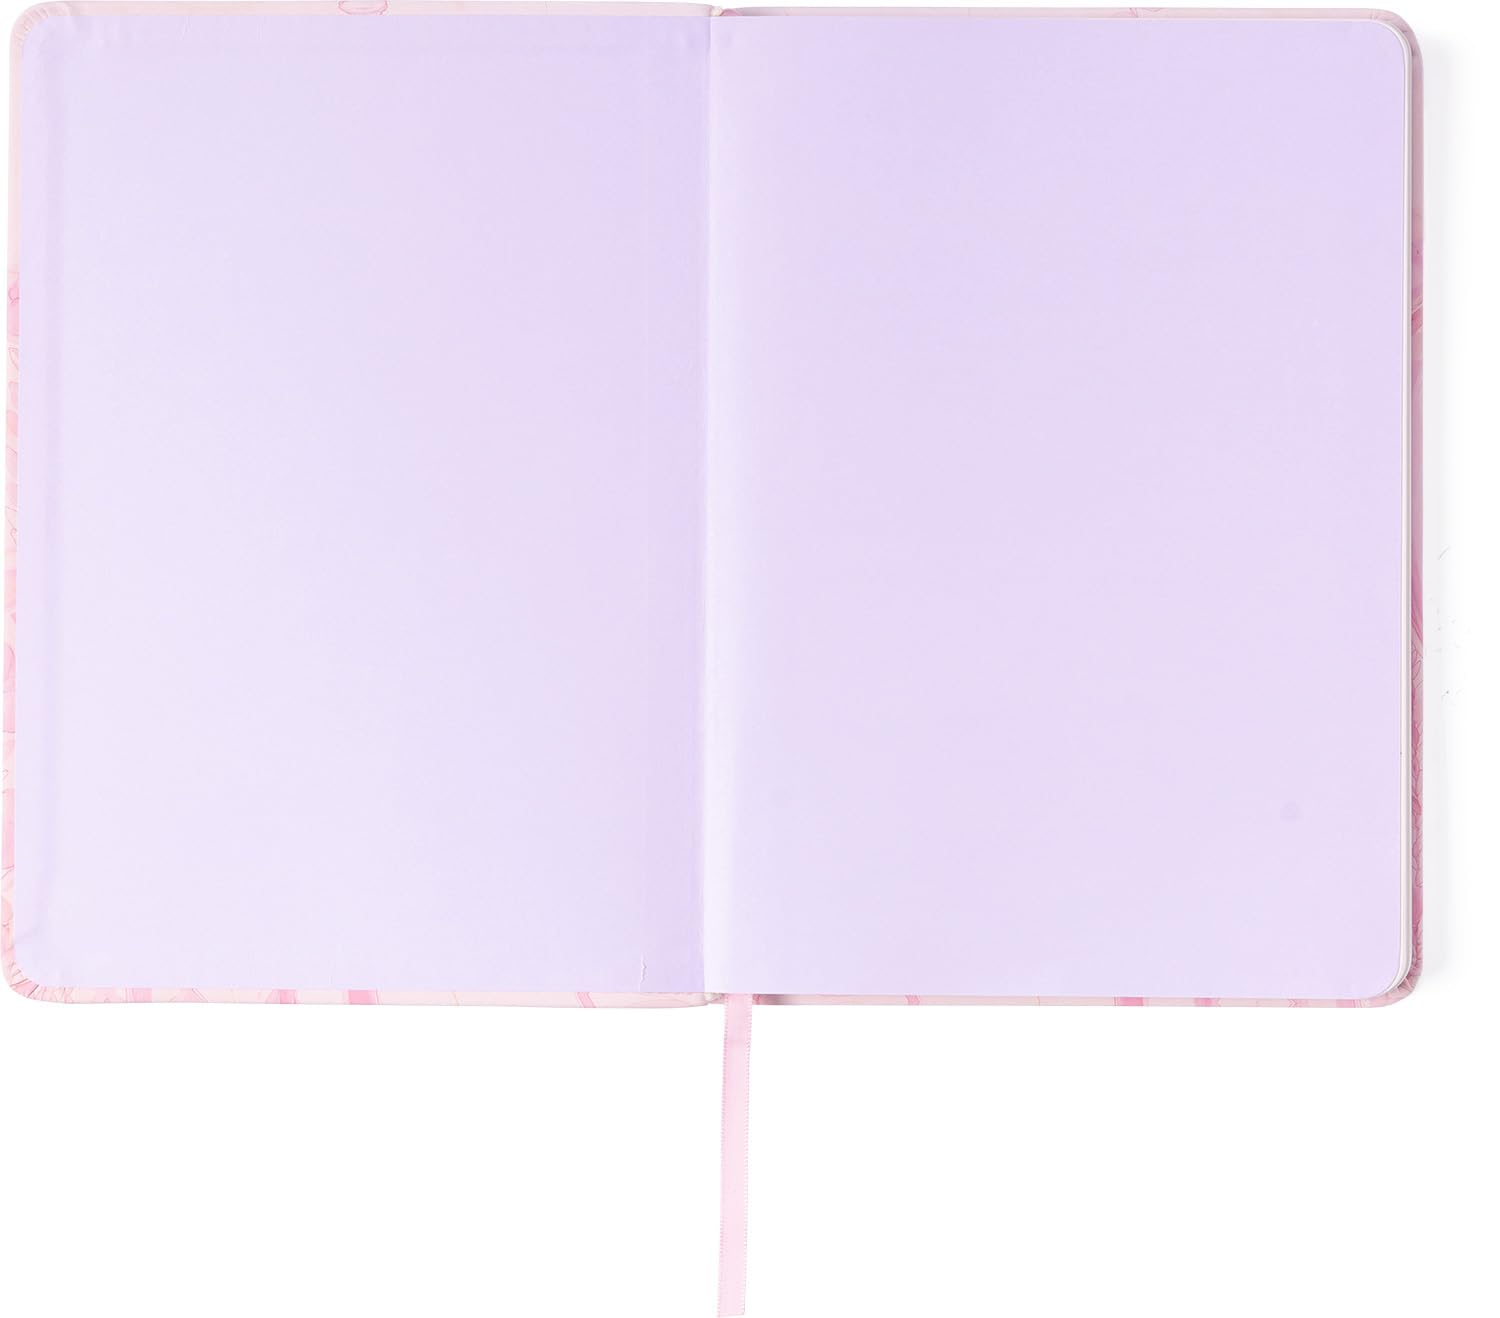 5.83x8.27 Inches Christian Notebook Journal for Women and Men